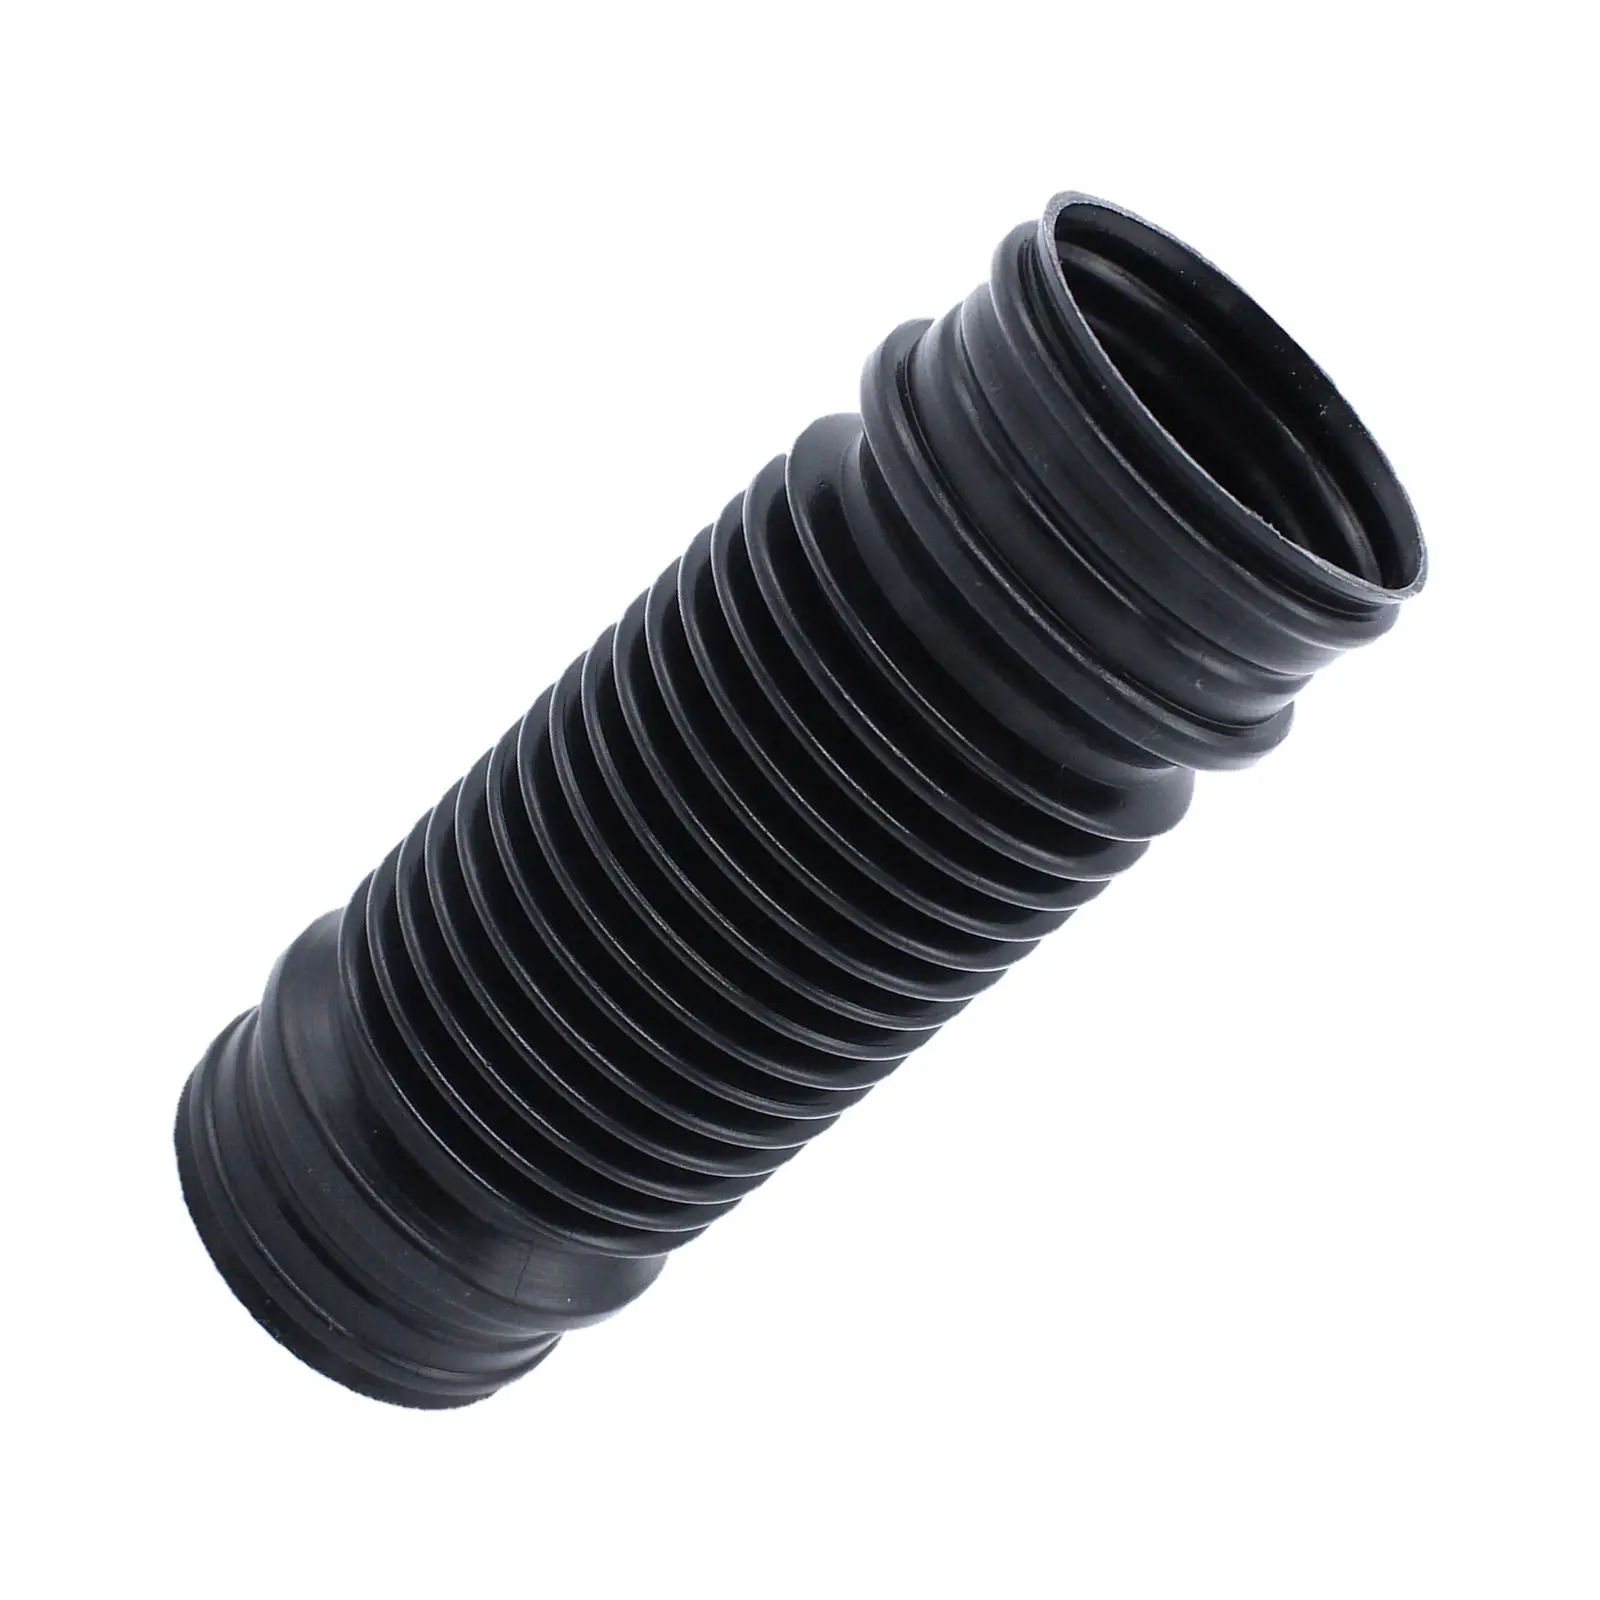 Intake Control Air Hose Pipe 1J0129618B Fit for VW Golf 98-06 Air Intake Tube Cleaner Hose Replace